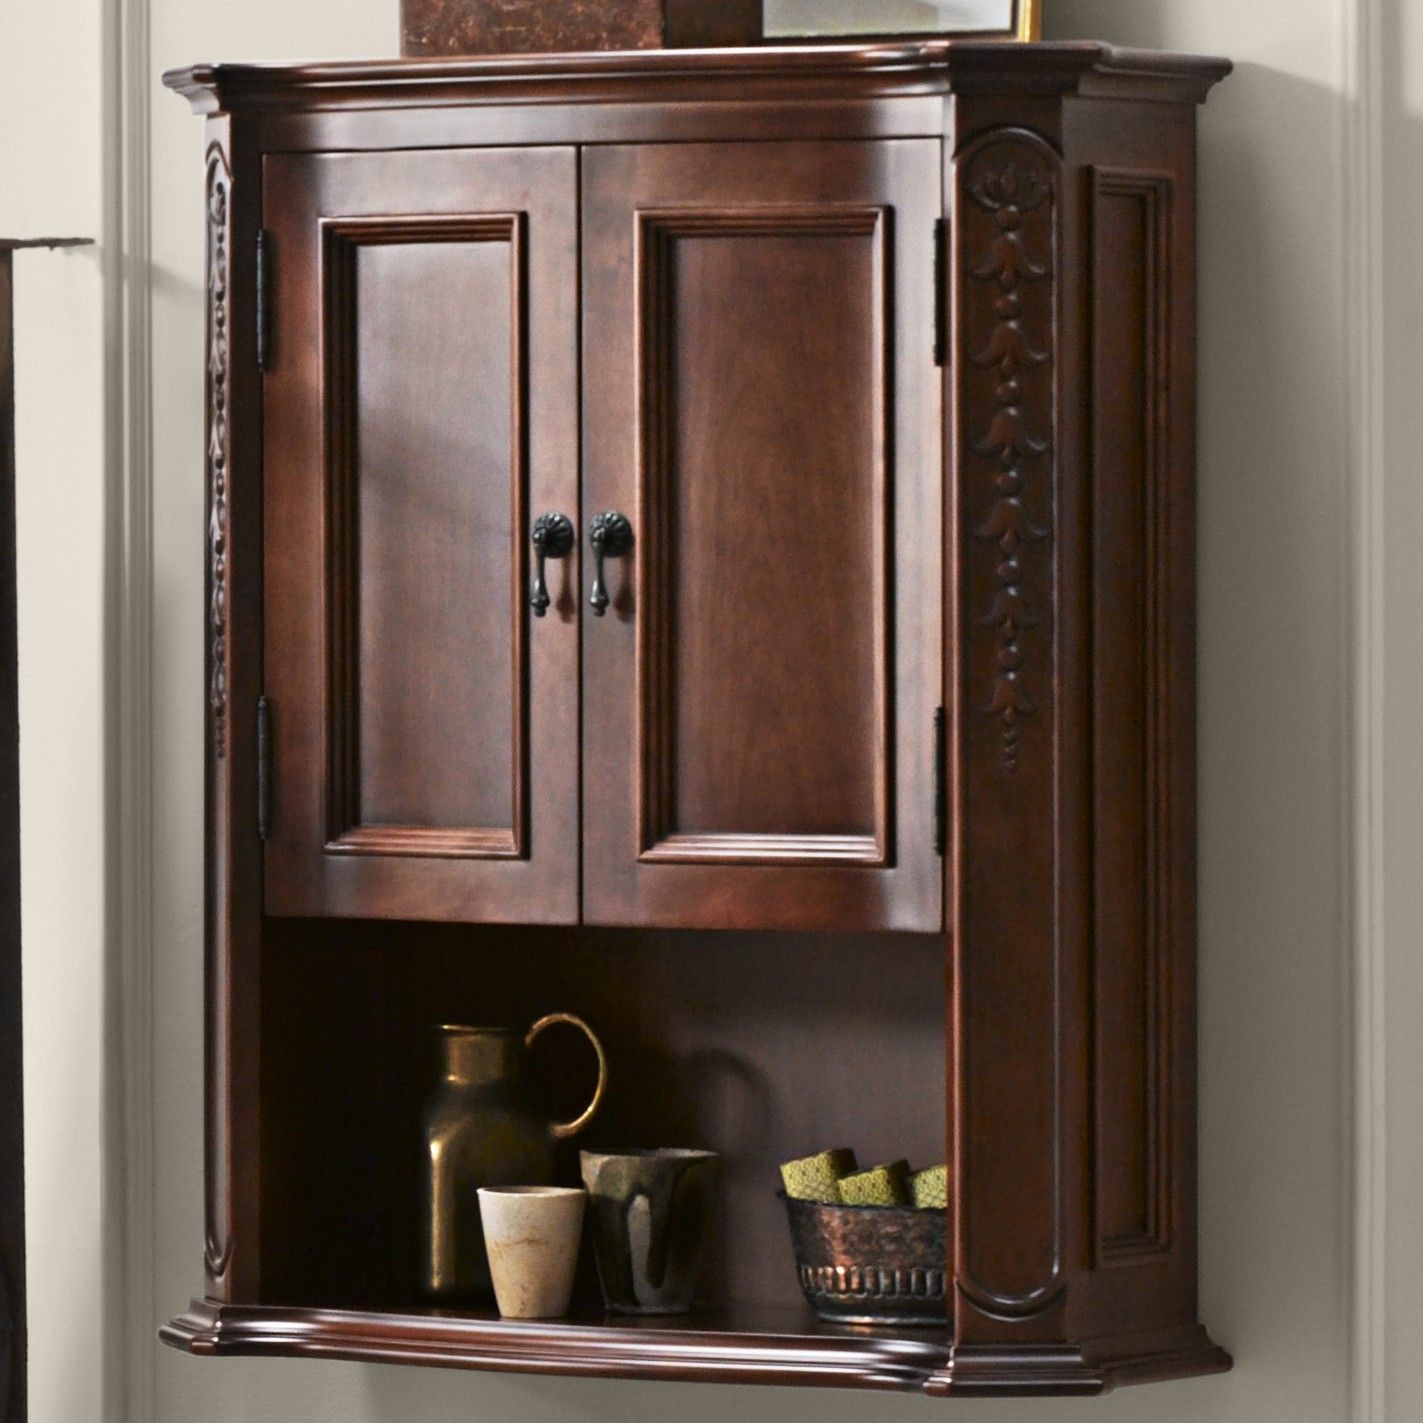 Mounted Bathroom Cabinet
 Bordeaux 26 3" W x 32 01" H Wall Mounted Cabinet